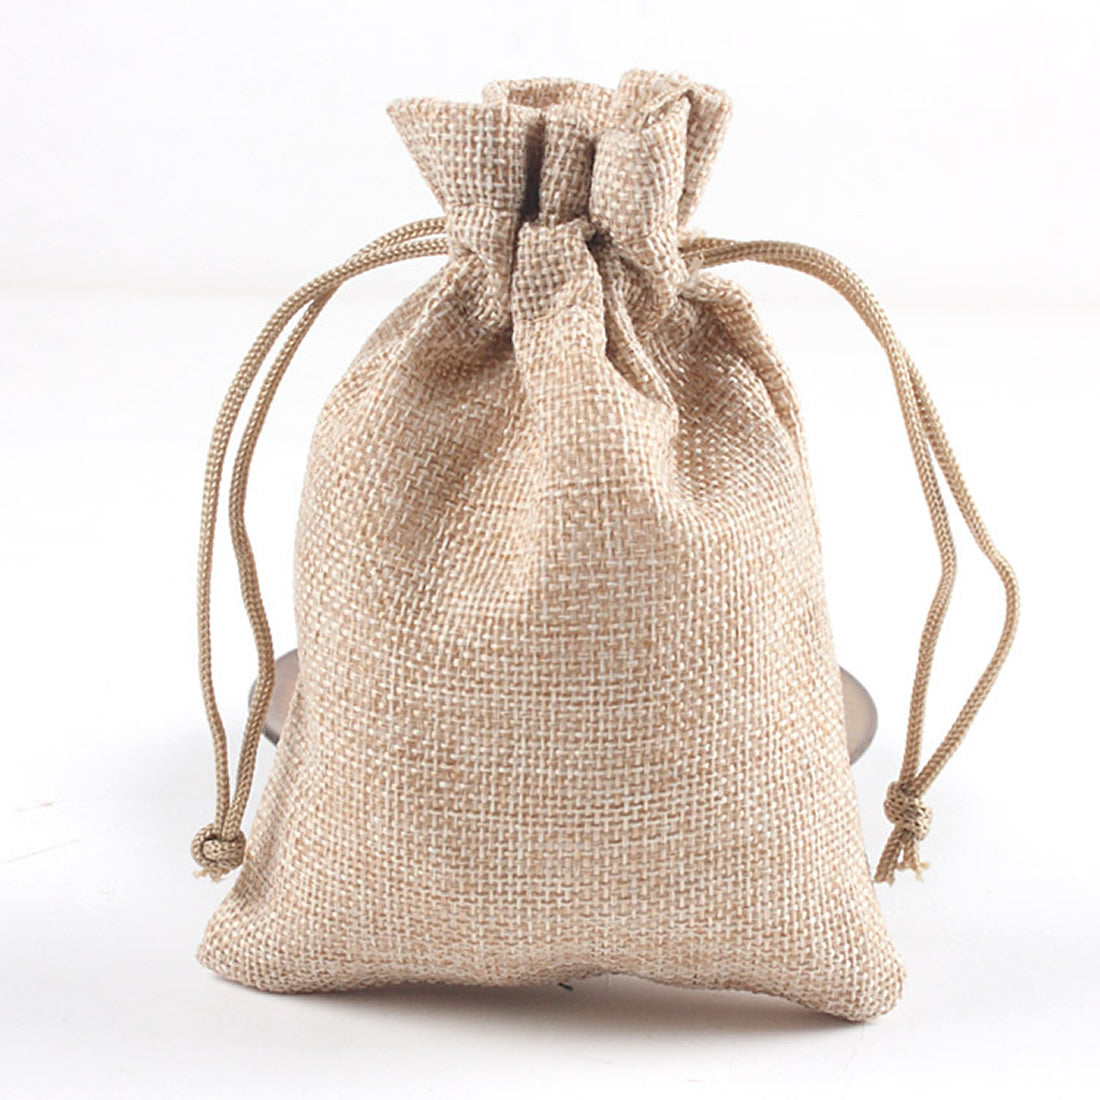 PK/10 - Natural - COTTON #5 BAGS 4 x 5.25 inch - with Draw String